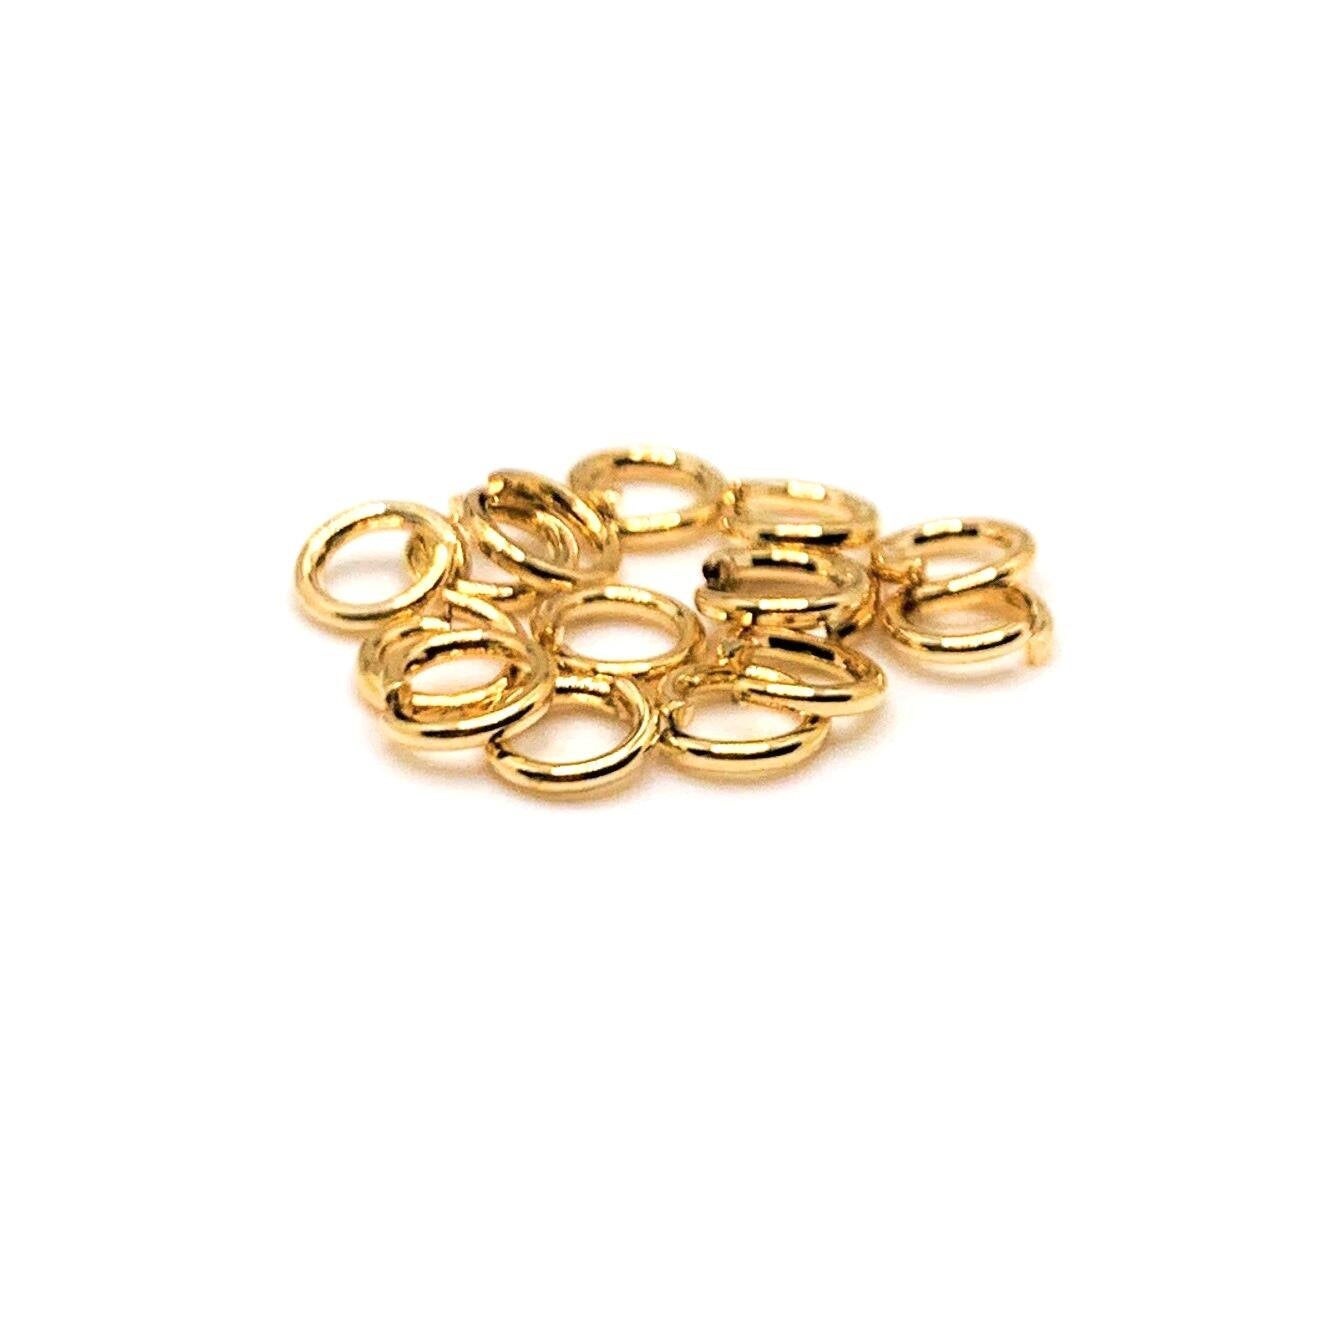 100, 500 or 1,000 Pieces: 4 mm KC Gold/Light Gold Open Jump Rings, 21g